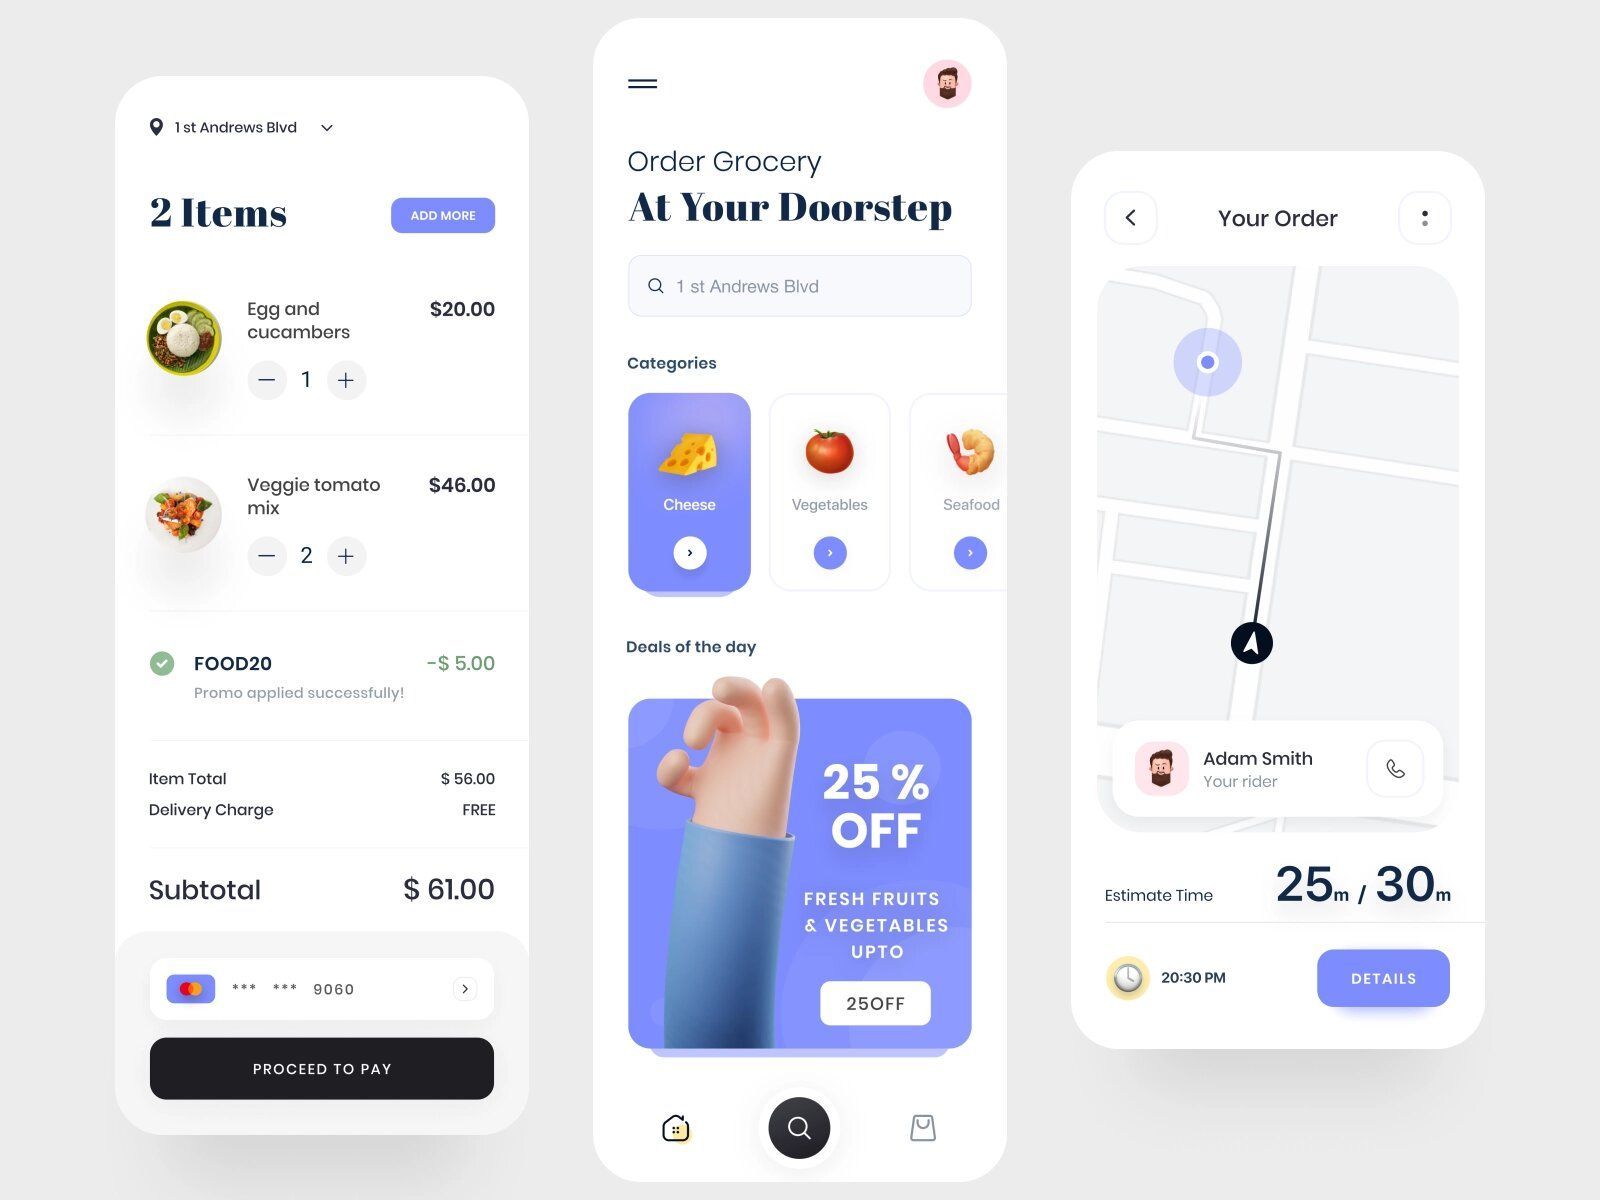 Order and delivery tracking is often an integral part of each food delivery app (*image by [Eduard](https://dribbble.com/Ed_m){ rel="nofollow" target="_blank" .default-md}*)